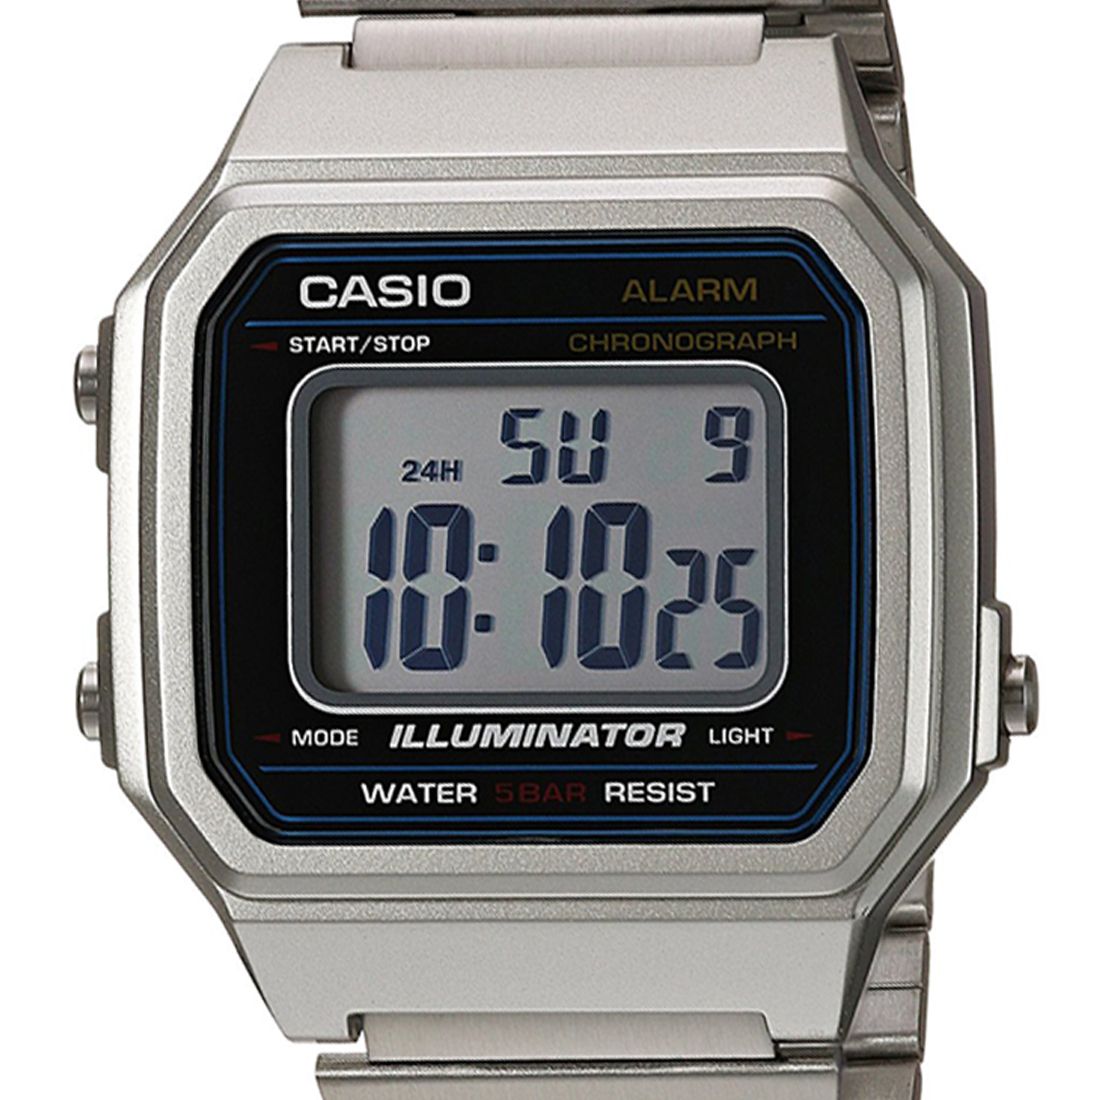 Buy Casio Classic Vintage Series Wrist Watch for Men - B650WD-1A in Pakistan